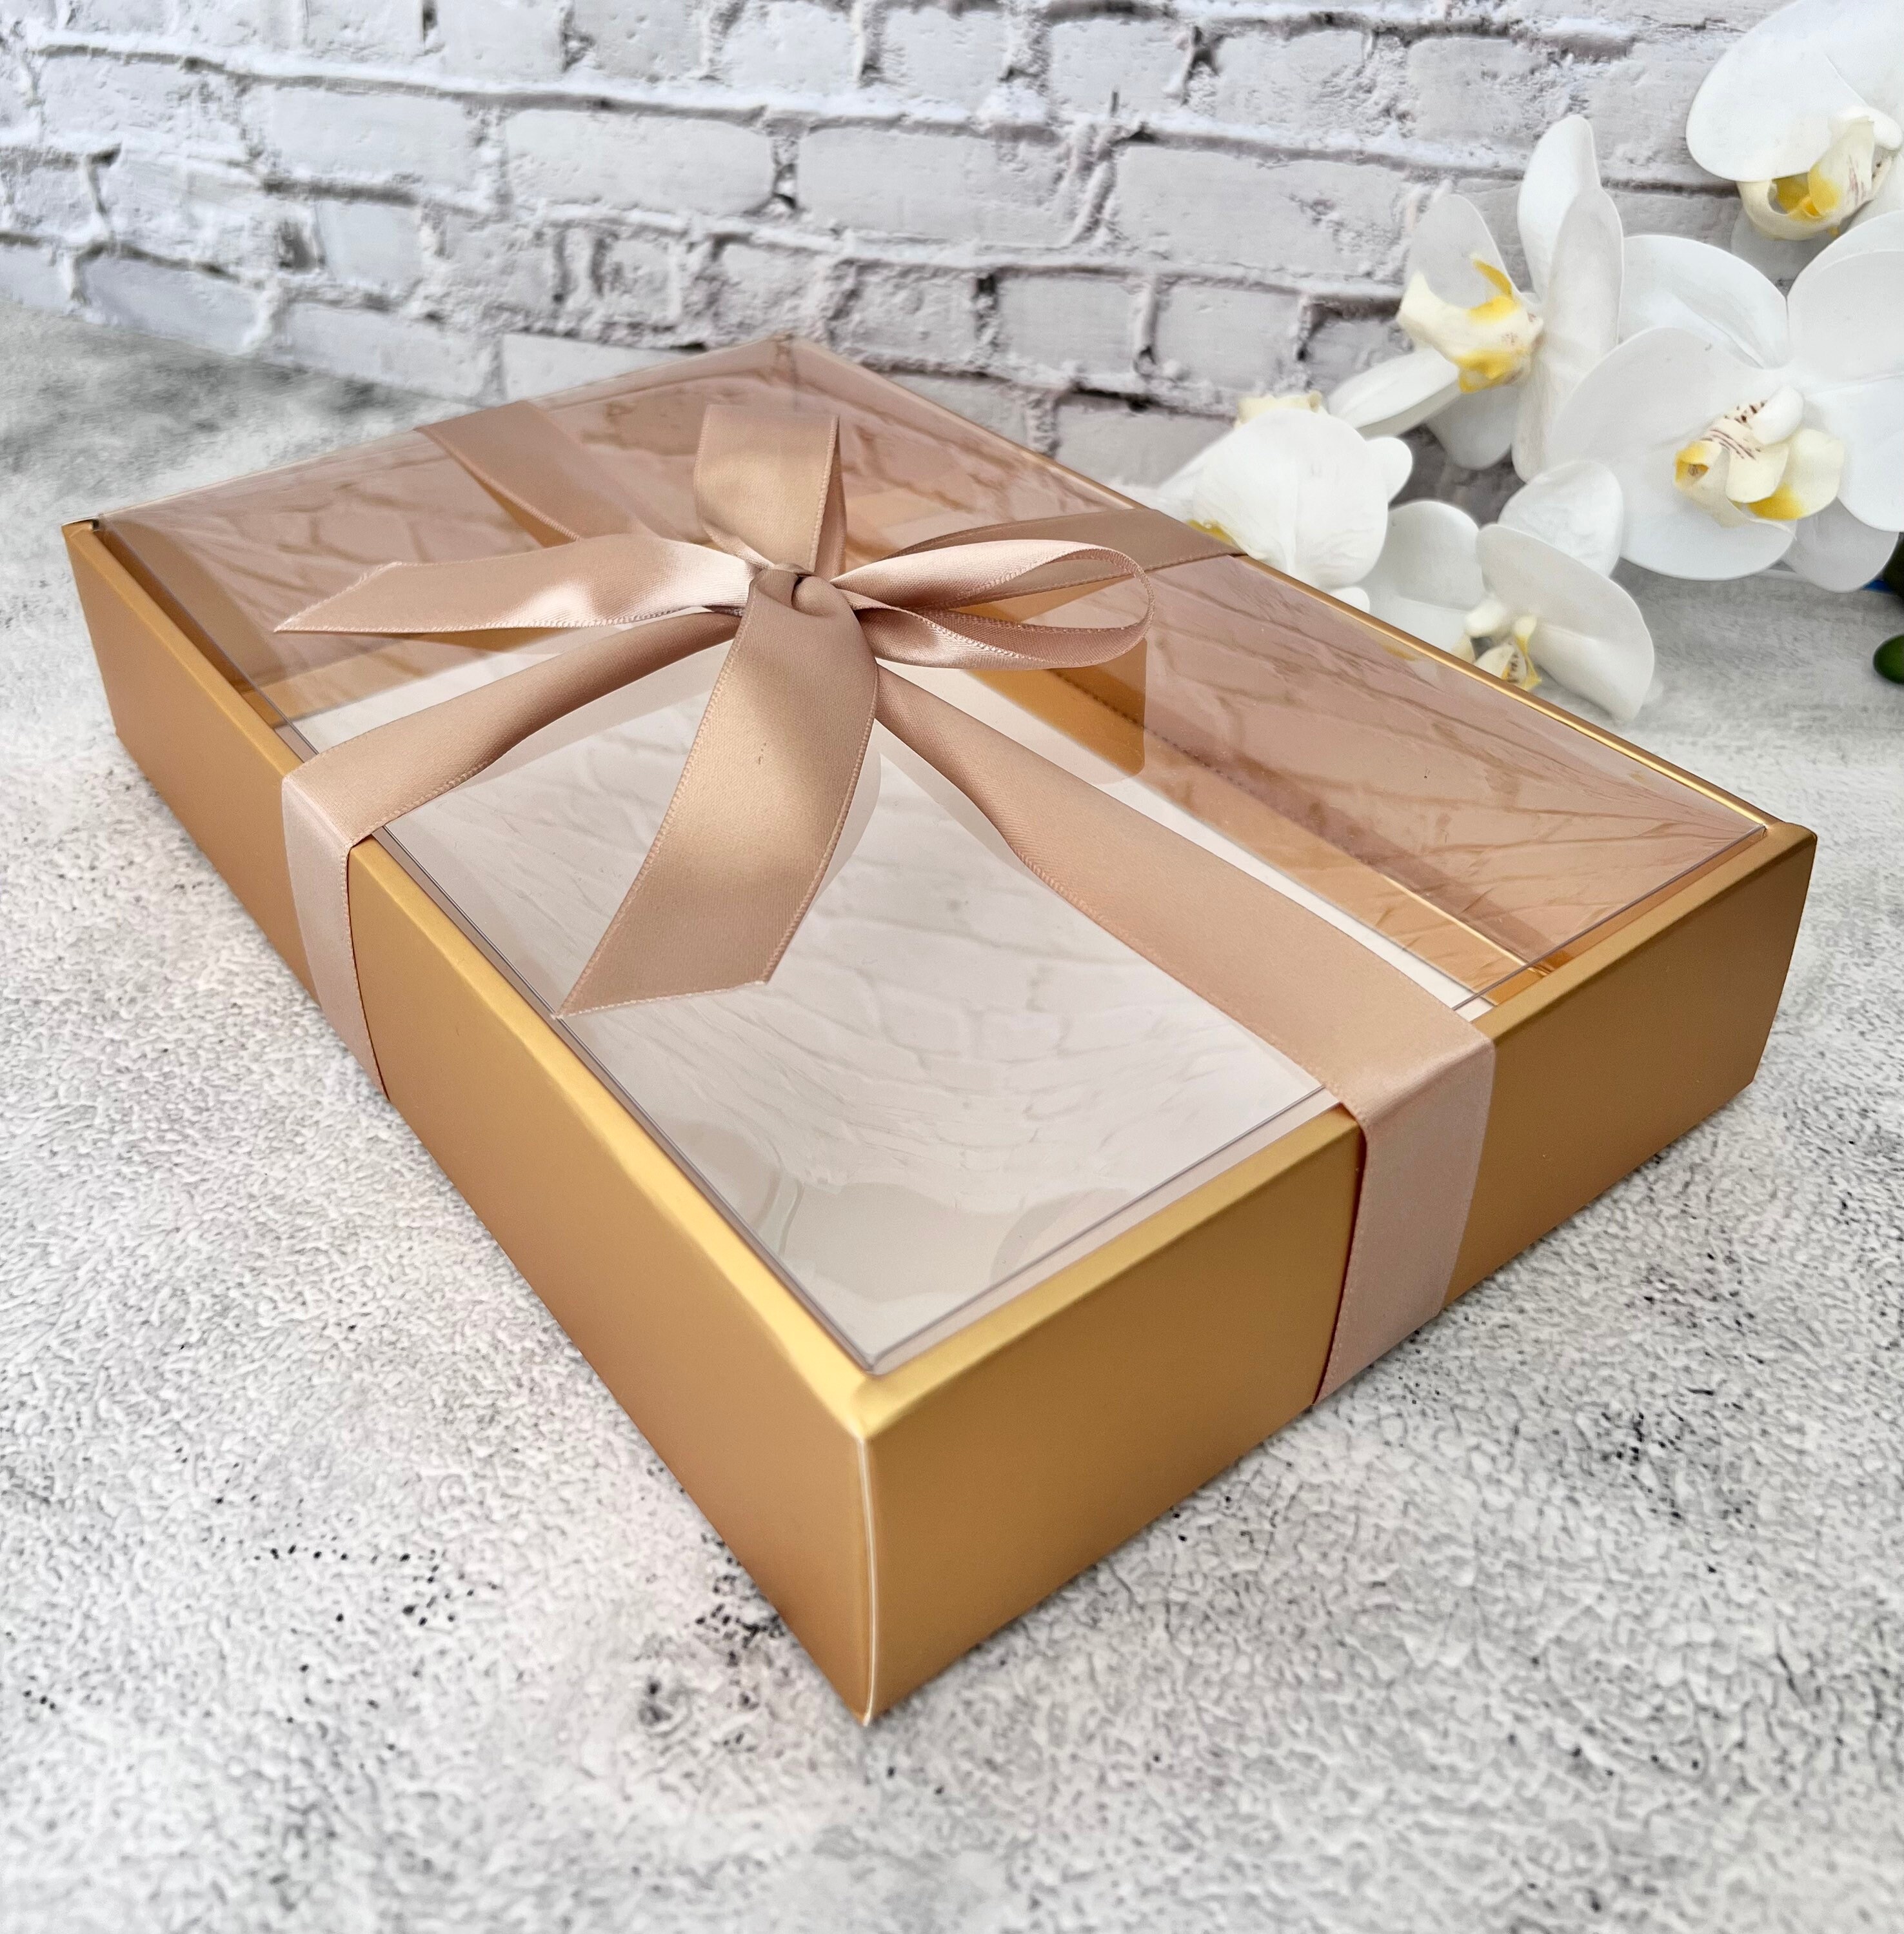 Gift Box 8 x 8 x 4 inch, Big Gift Box with Lids and Fake Bows,for  Christmas, Birthdays, Father's Day, Bridal Showers, Weddings, Baby Showers  and